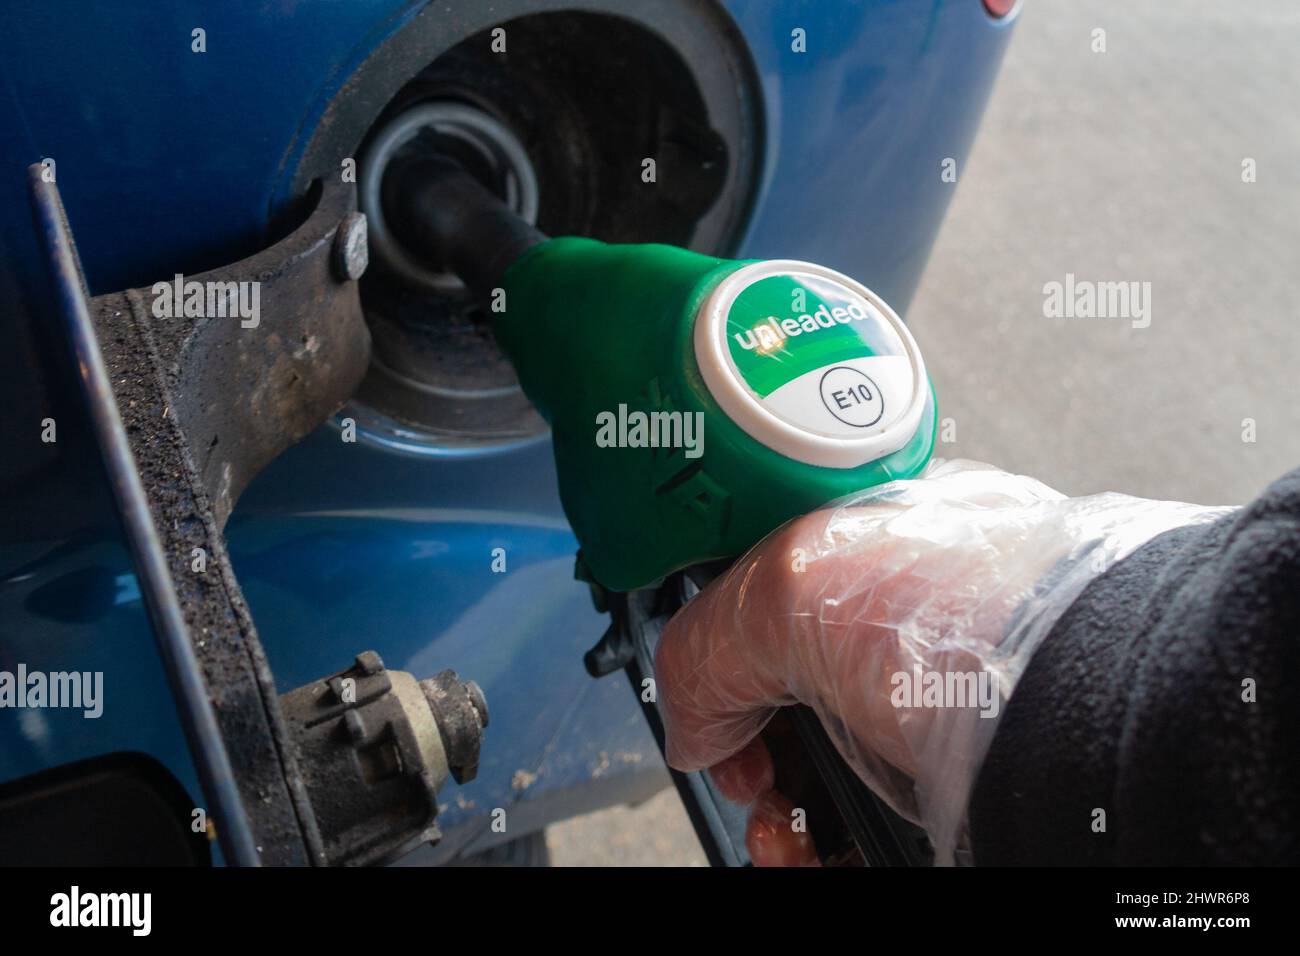 Ashford, Kent, UK. 7th Mar, 2022. A petrol station in Ashford, Kent is now charging over £1.67 per litre of diesel as a barrel of oil hits $130. A man fills up his car with E10 unleaded fuel. Photo Credit: Paul Lawrenson-PAL News/Alamy Live News Stock Photo